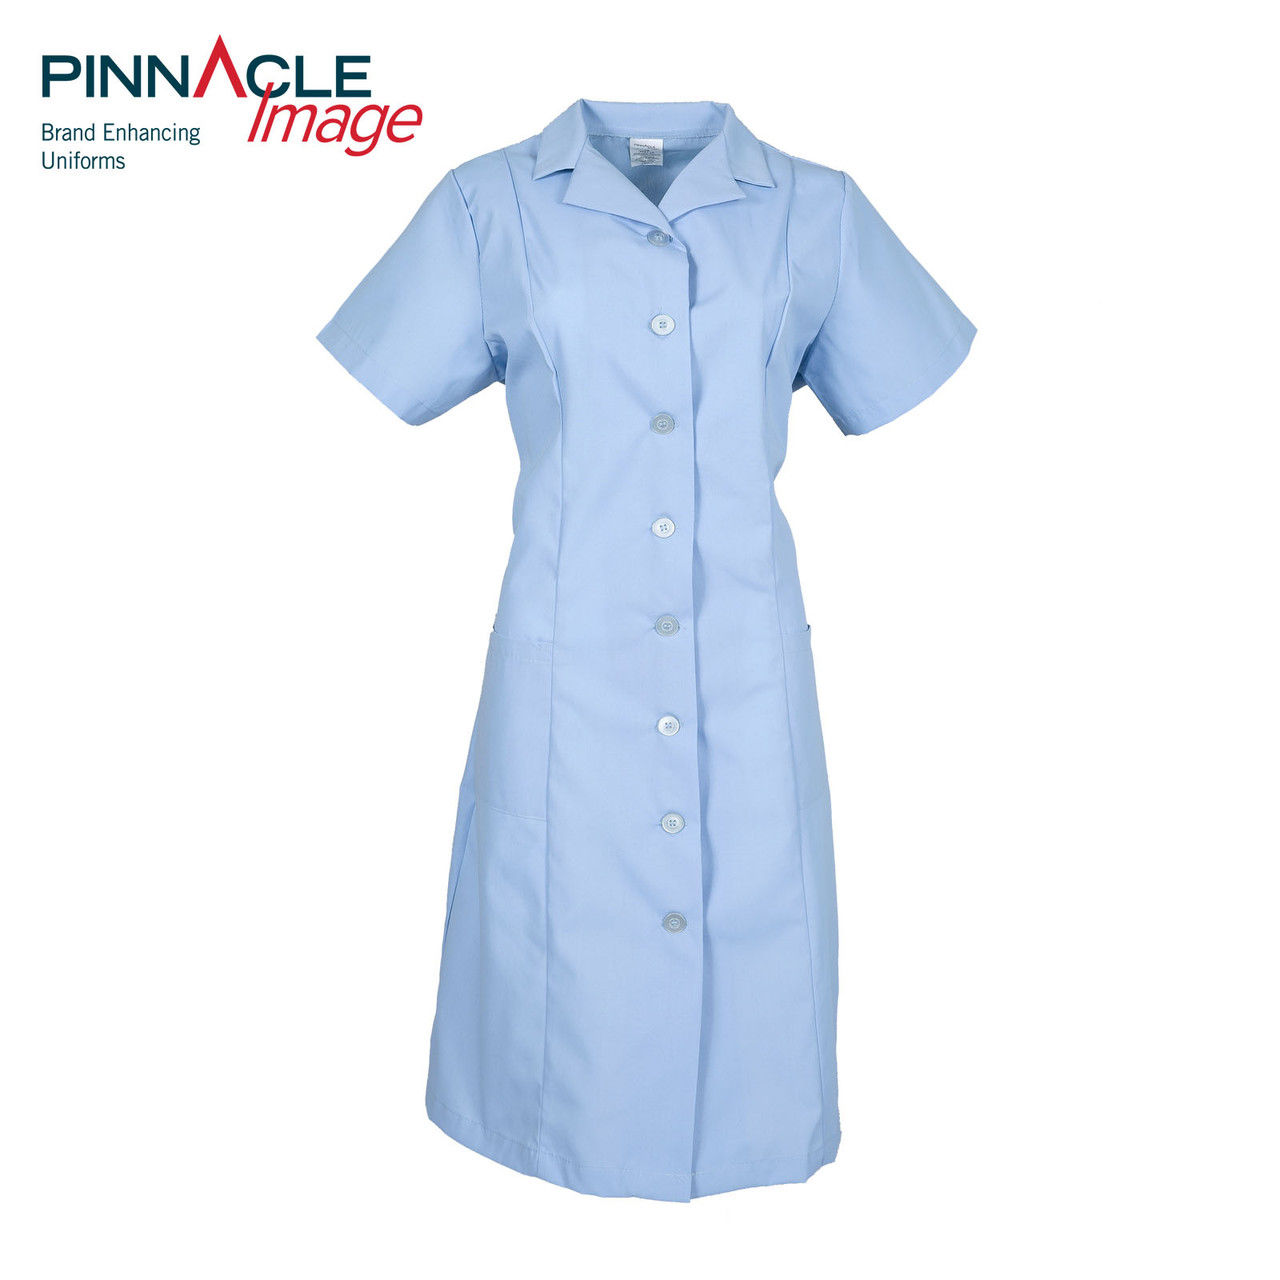 Where is the blue uniform dress shipped from?